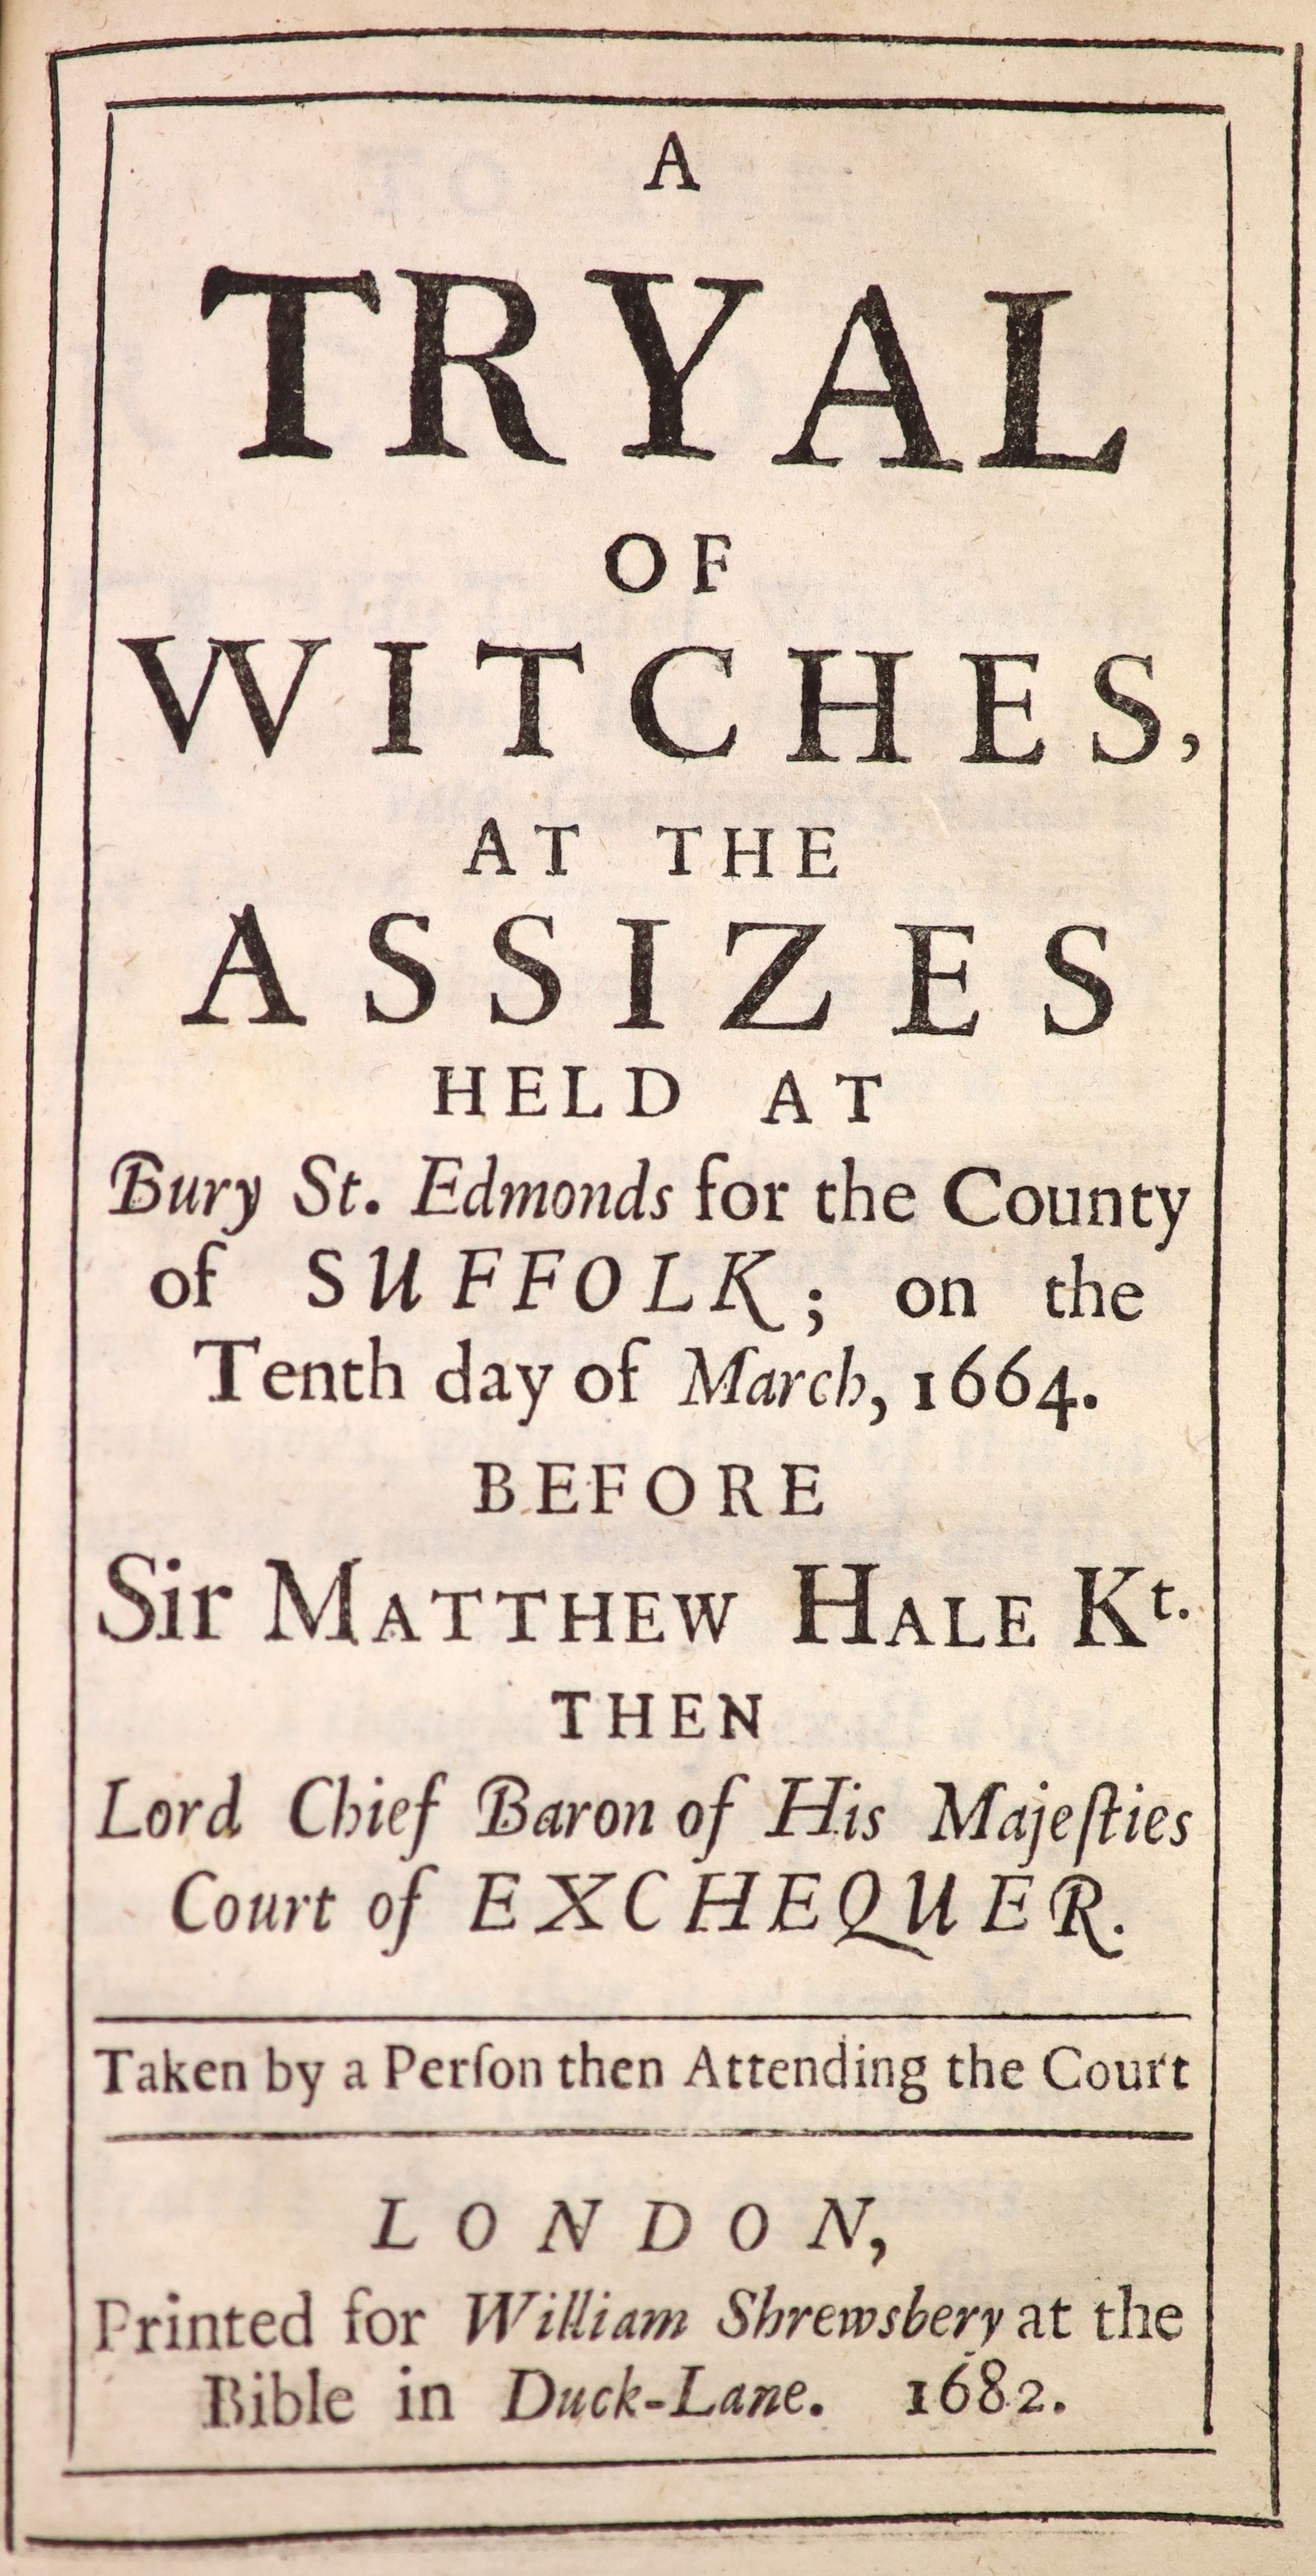 Witchcraft- Tryal of Witches (A), at the Assizes Held at Bury St. Edmunds for the County of Suffolk; on the Tenth Day of March, 1664. Before Sir Matthew Hale Kt., then Lord Chief Baron of His Majesties Court of Exchequer